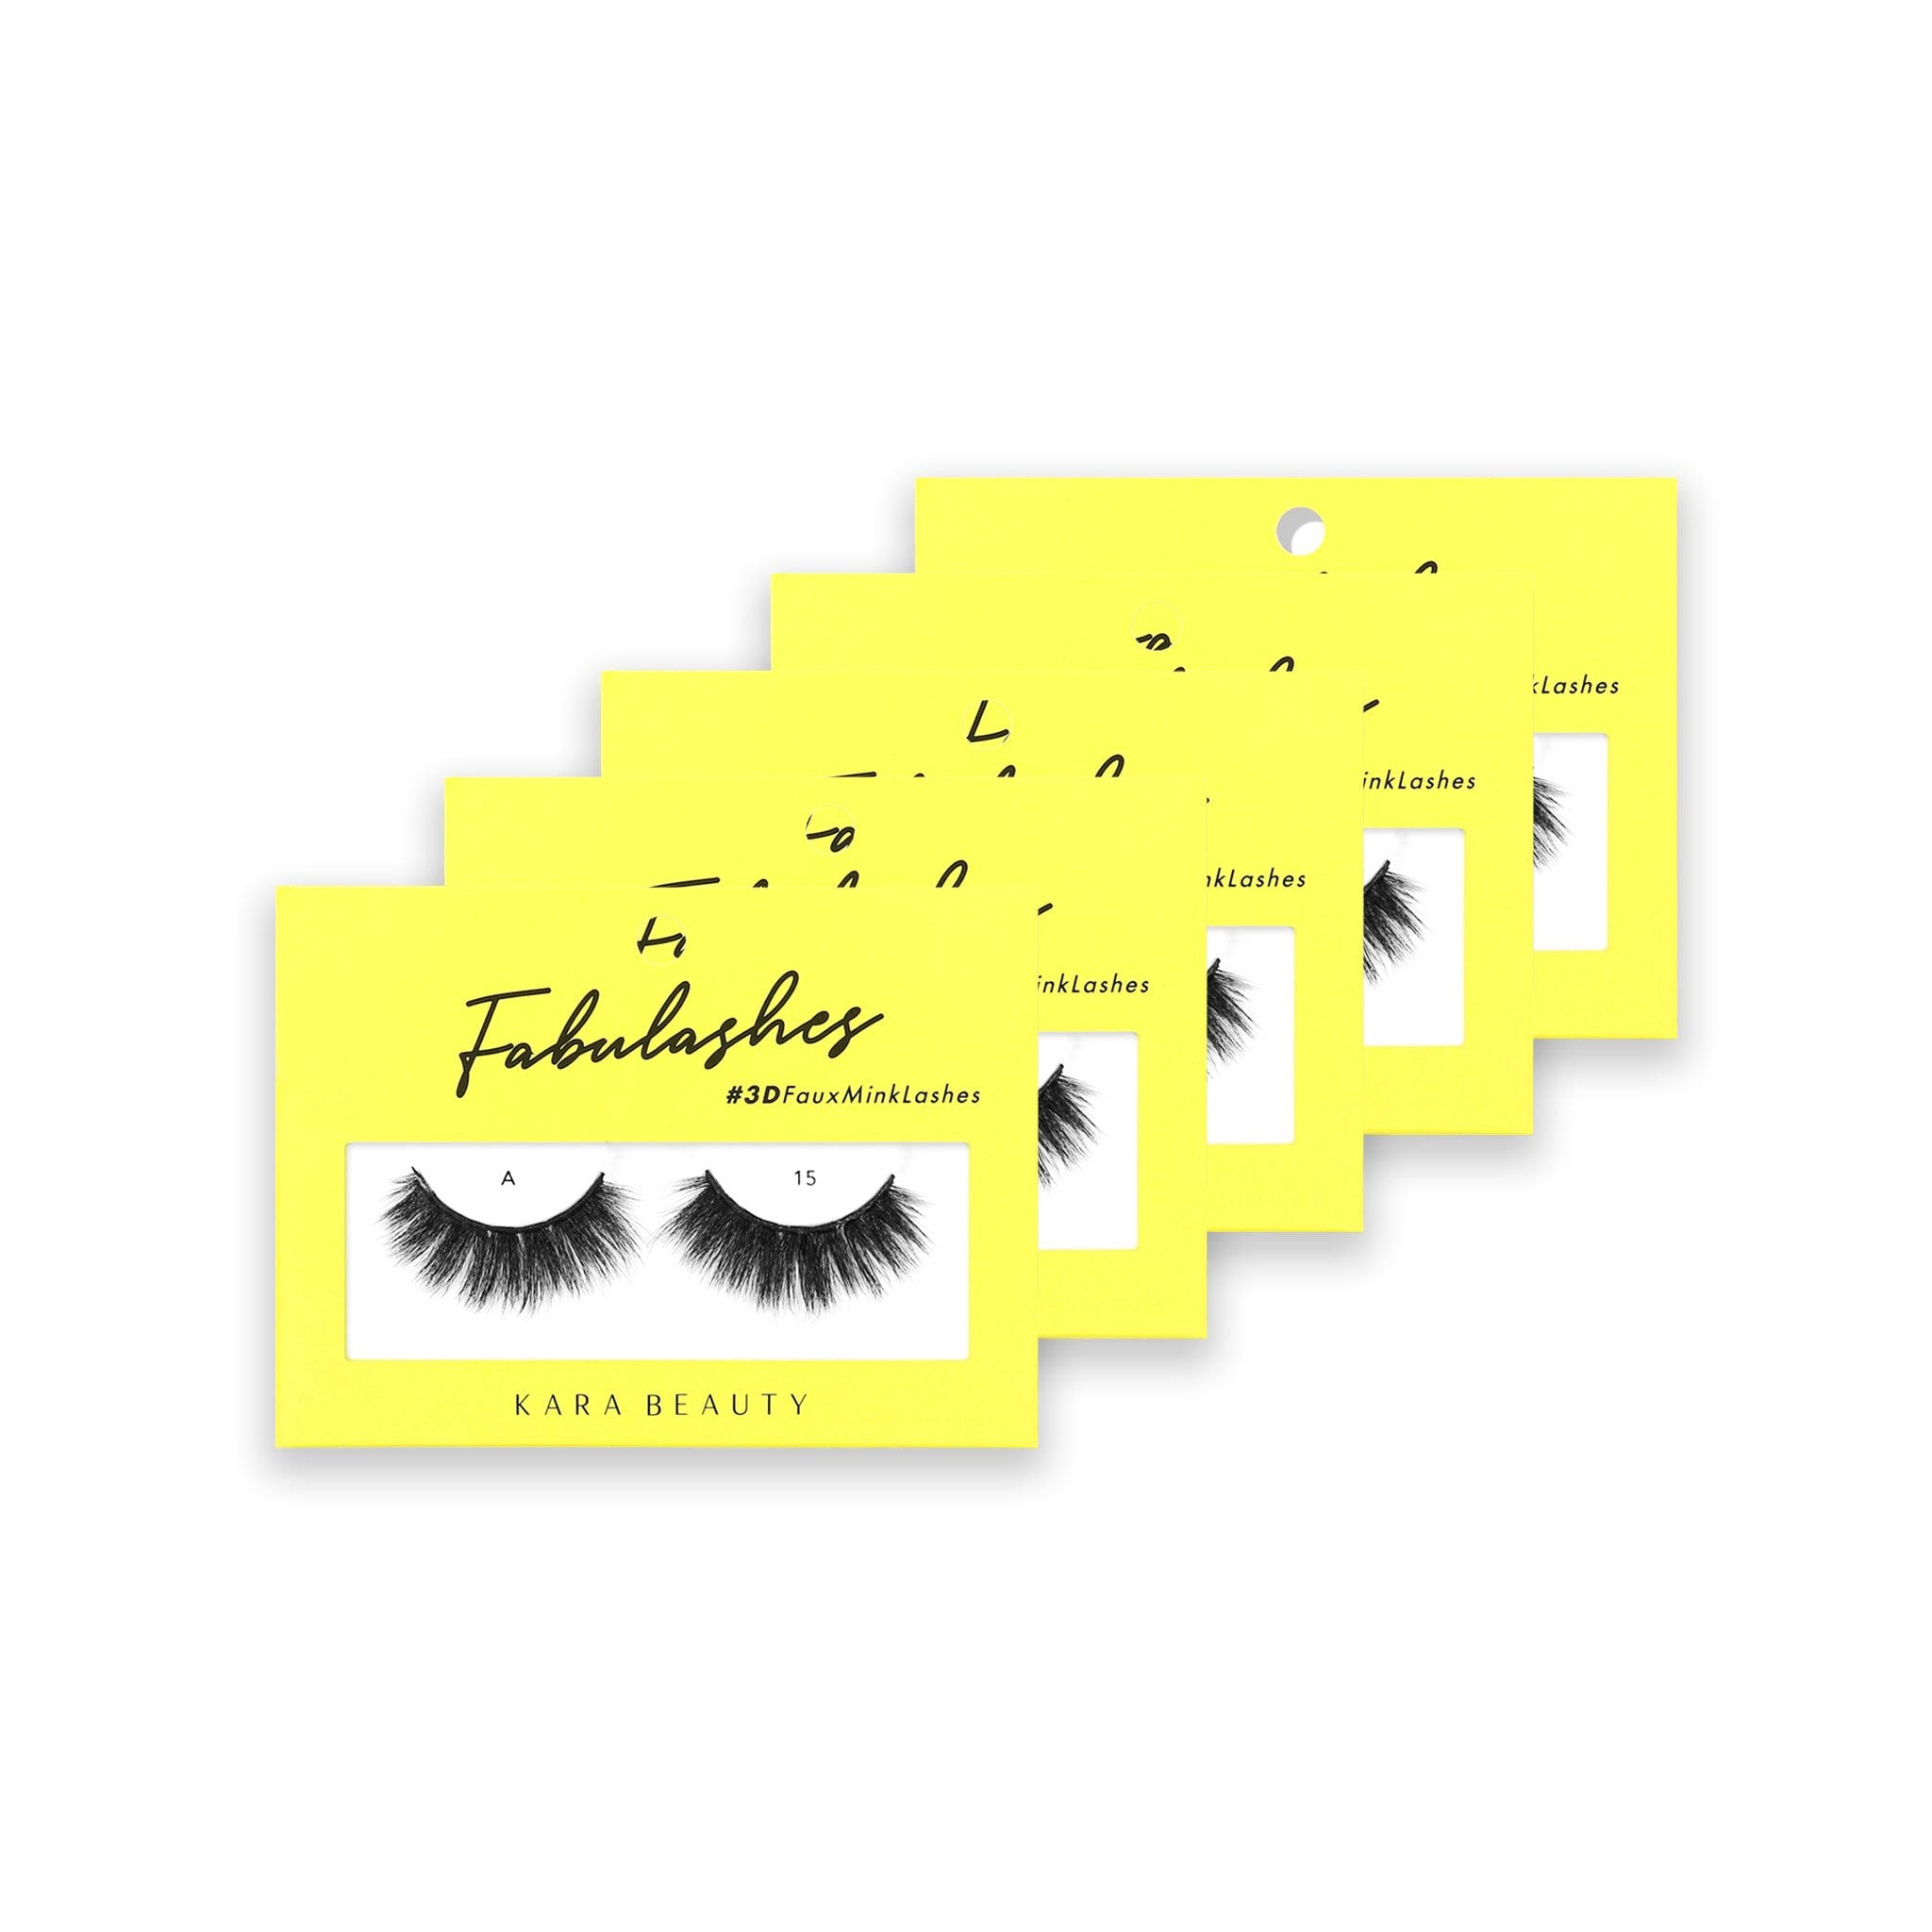 Style A15 Fabulashes 3D faux mink strip eyelashes 5 pack